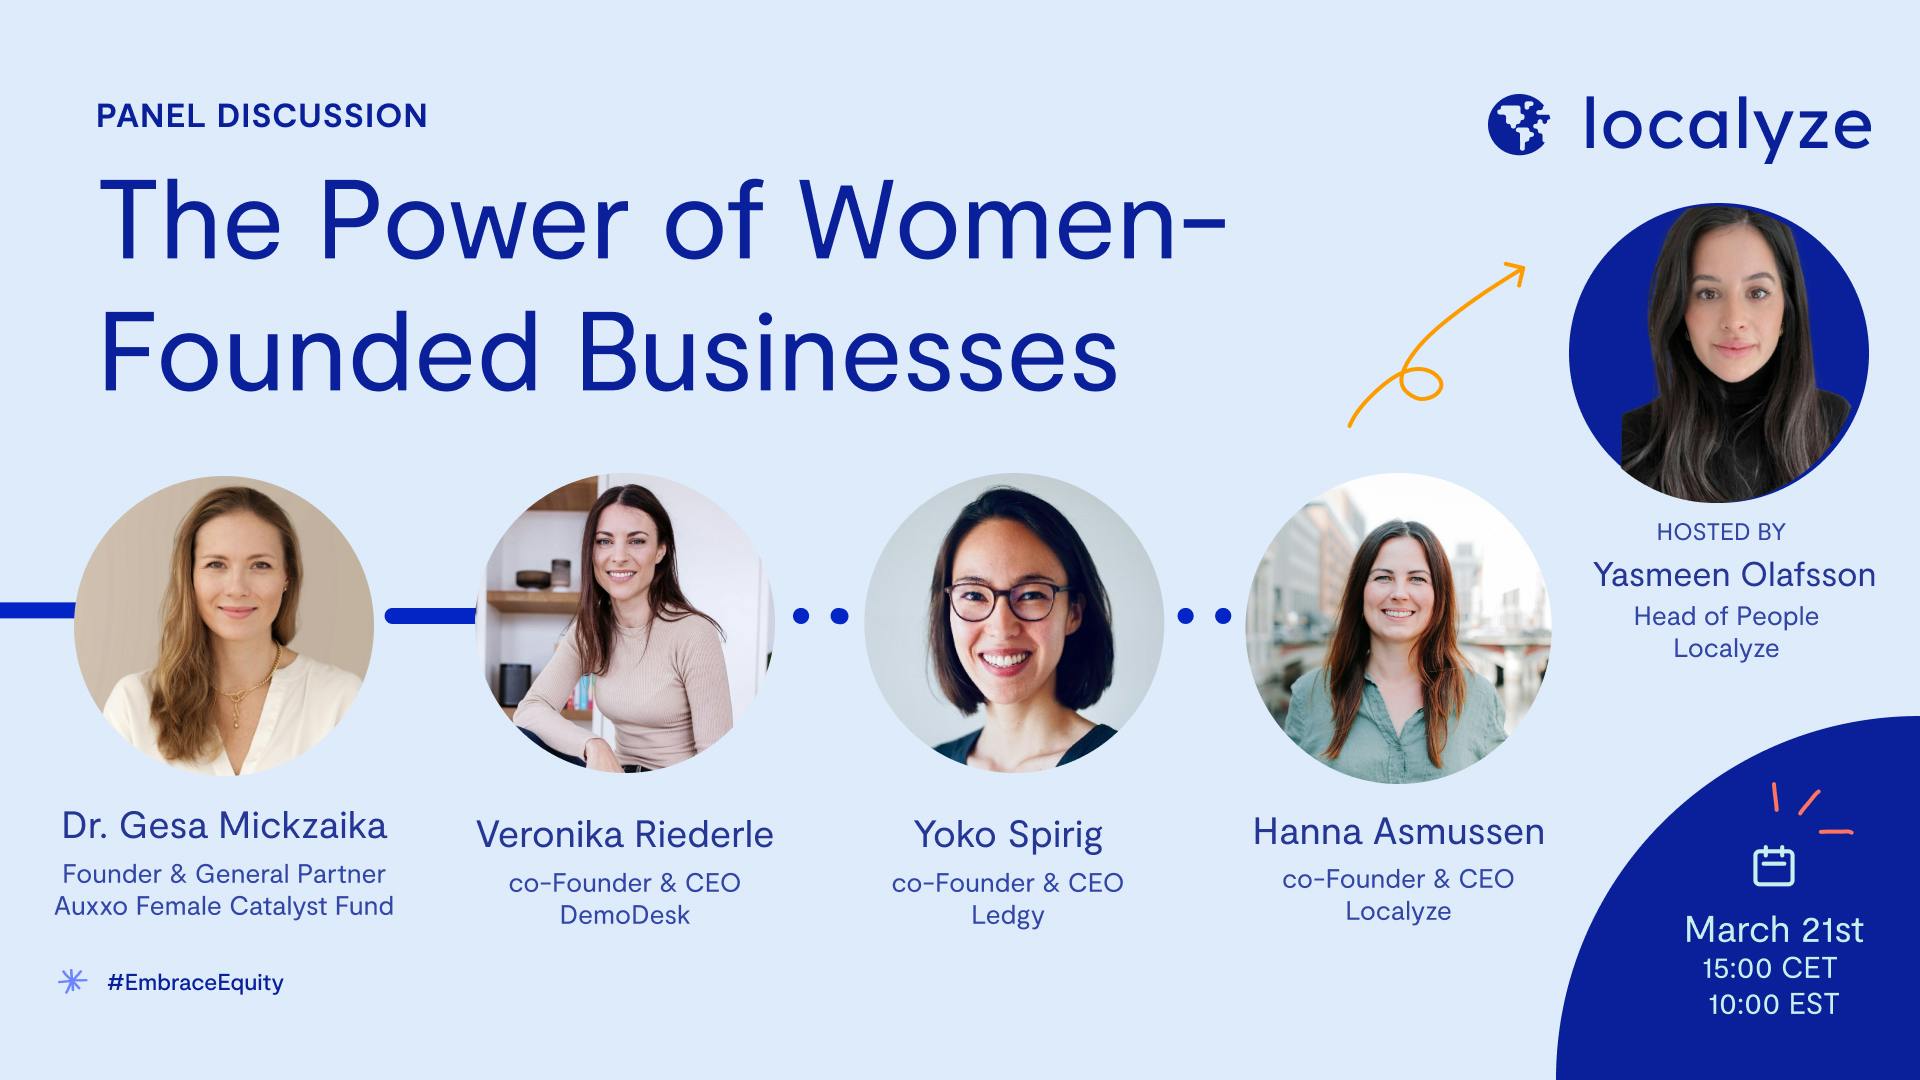 Rewatch the power of women-founded businesses